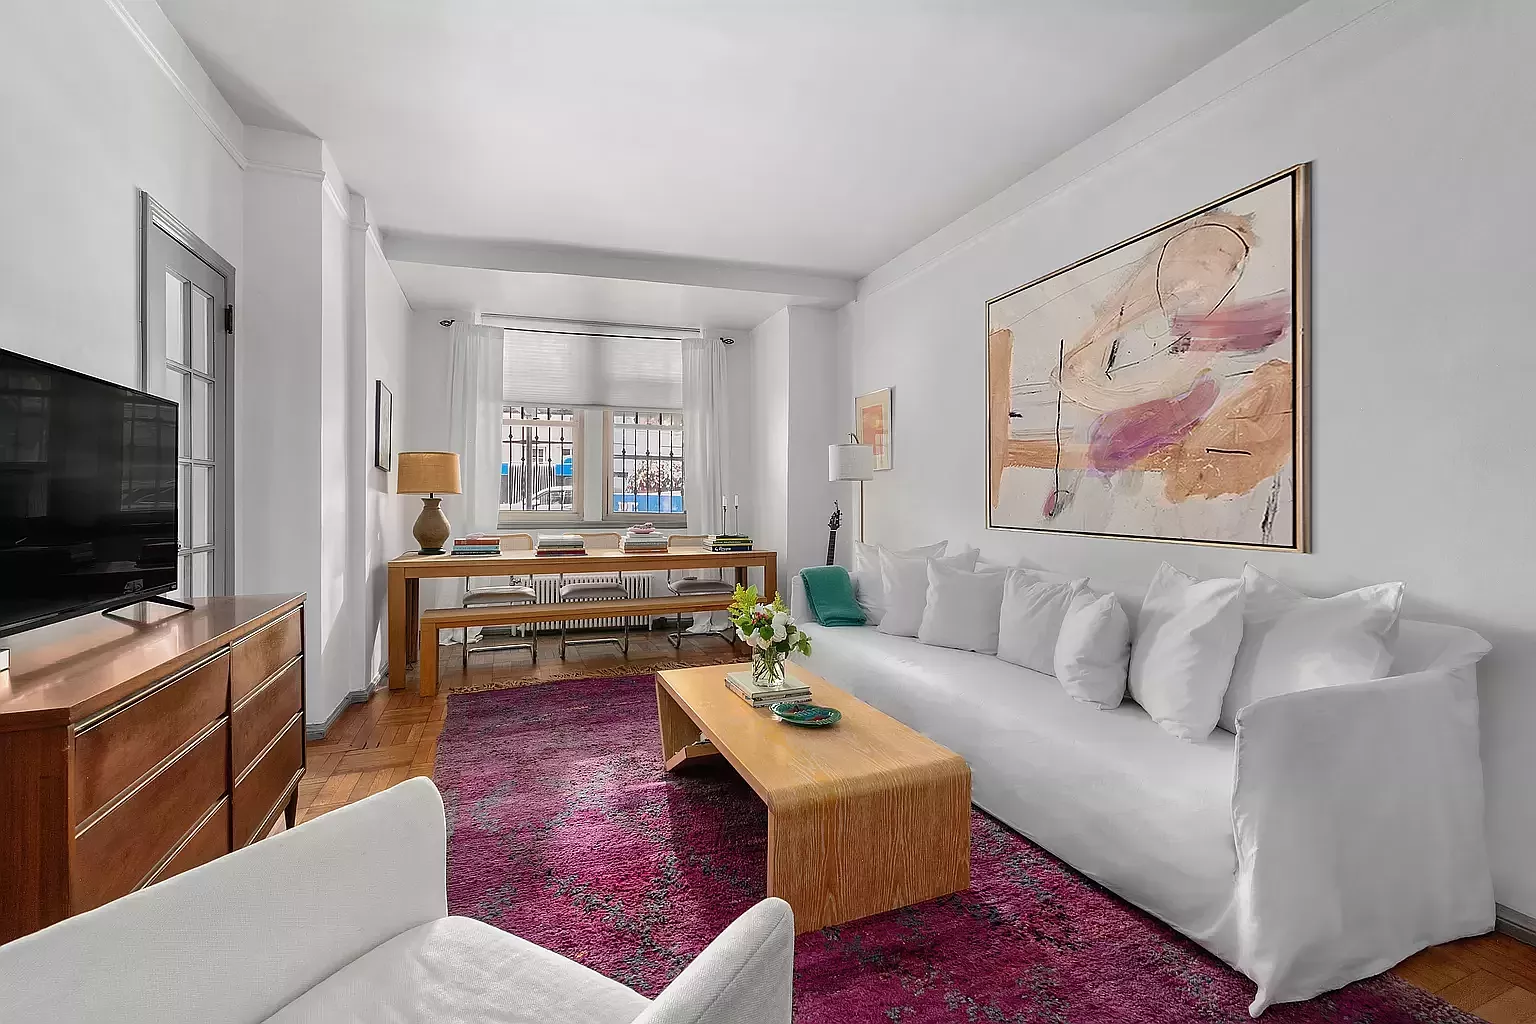 House for Sale in West Village, Manhattan NY